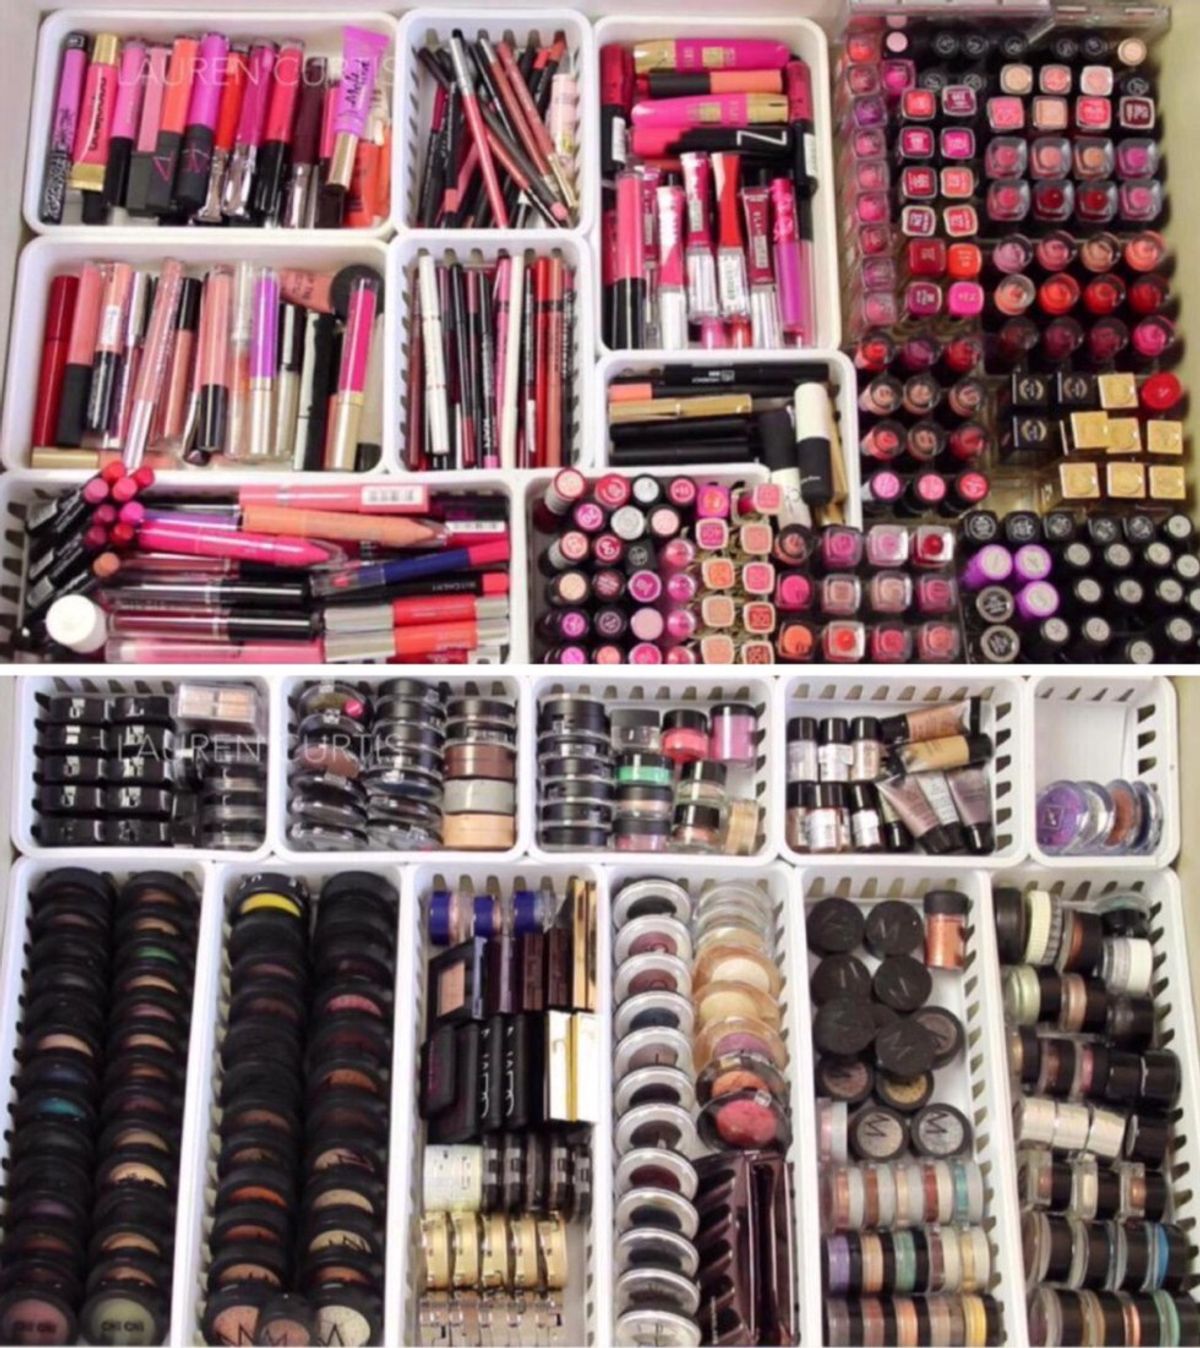 16 Struggles Every Make-Up Lover Knows